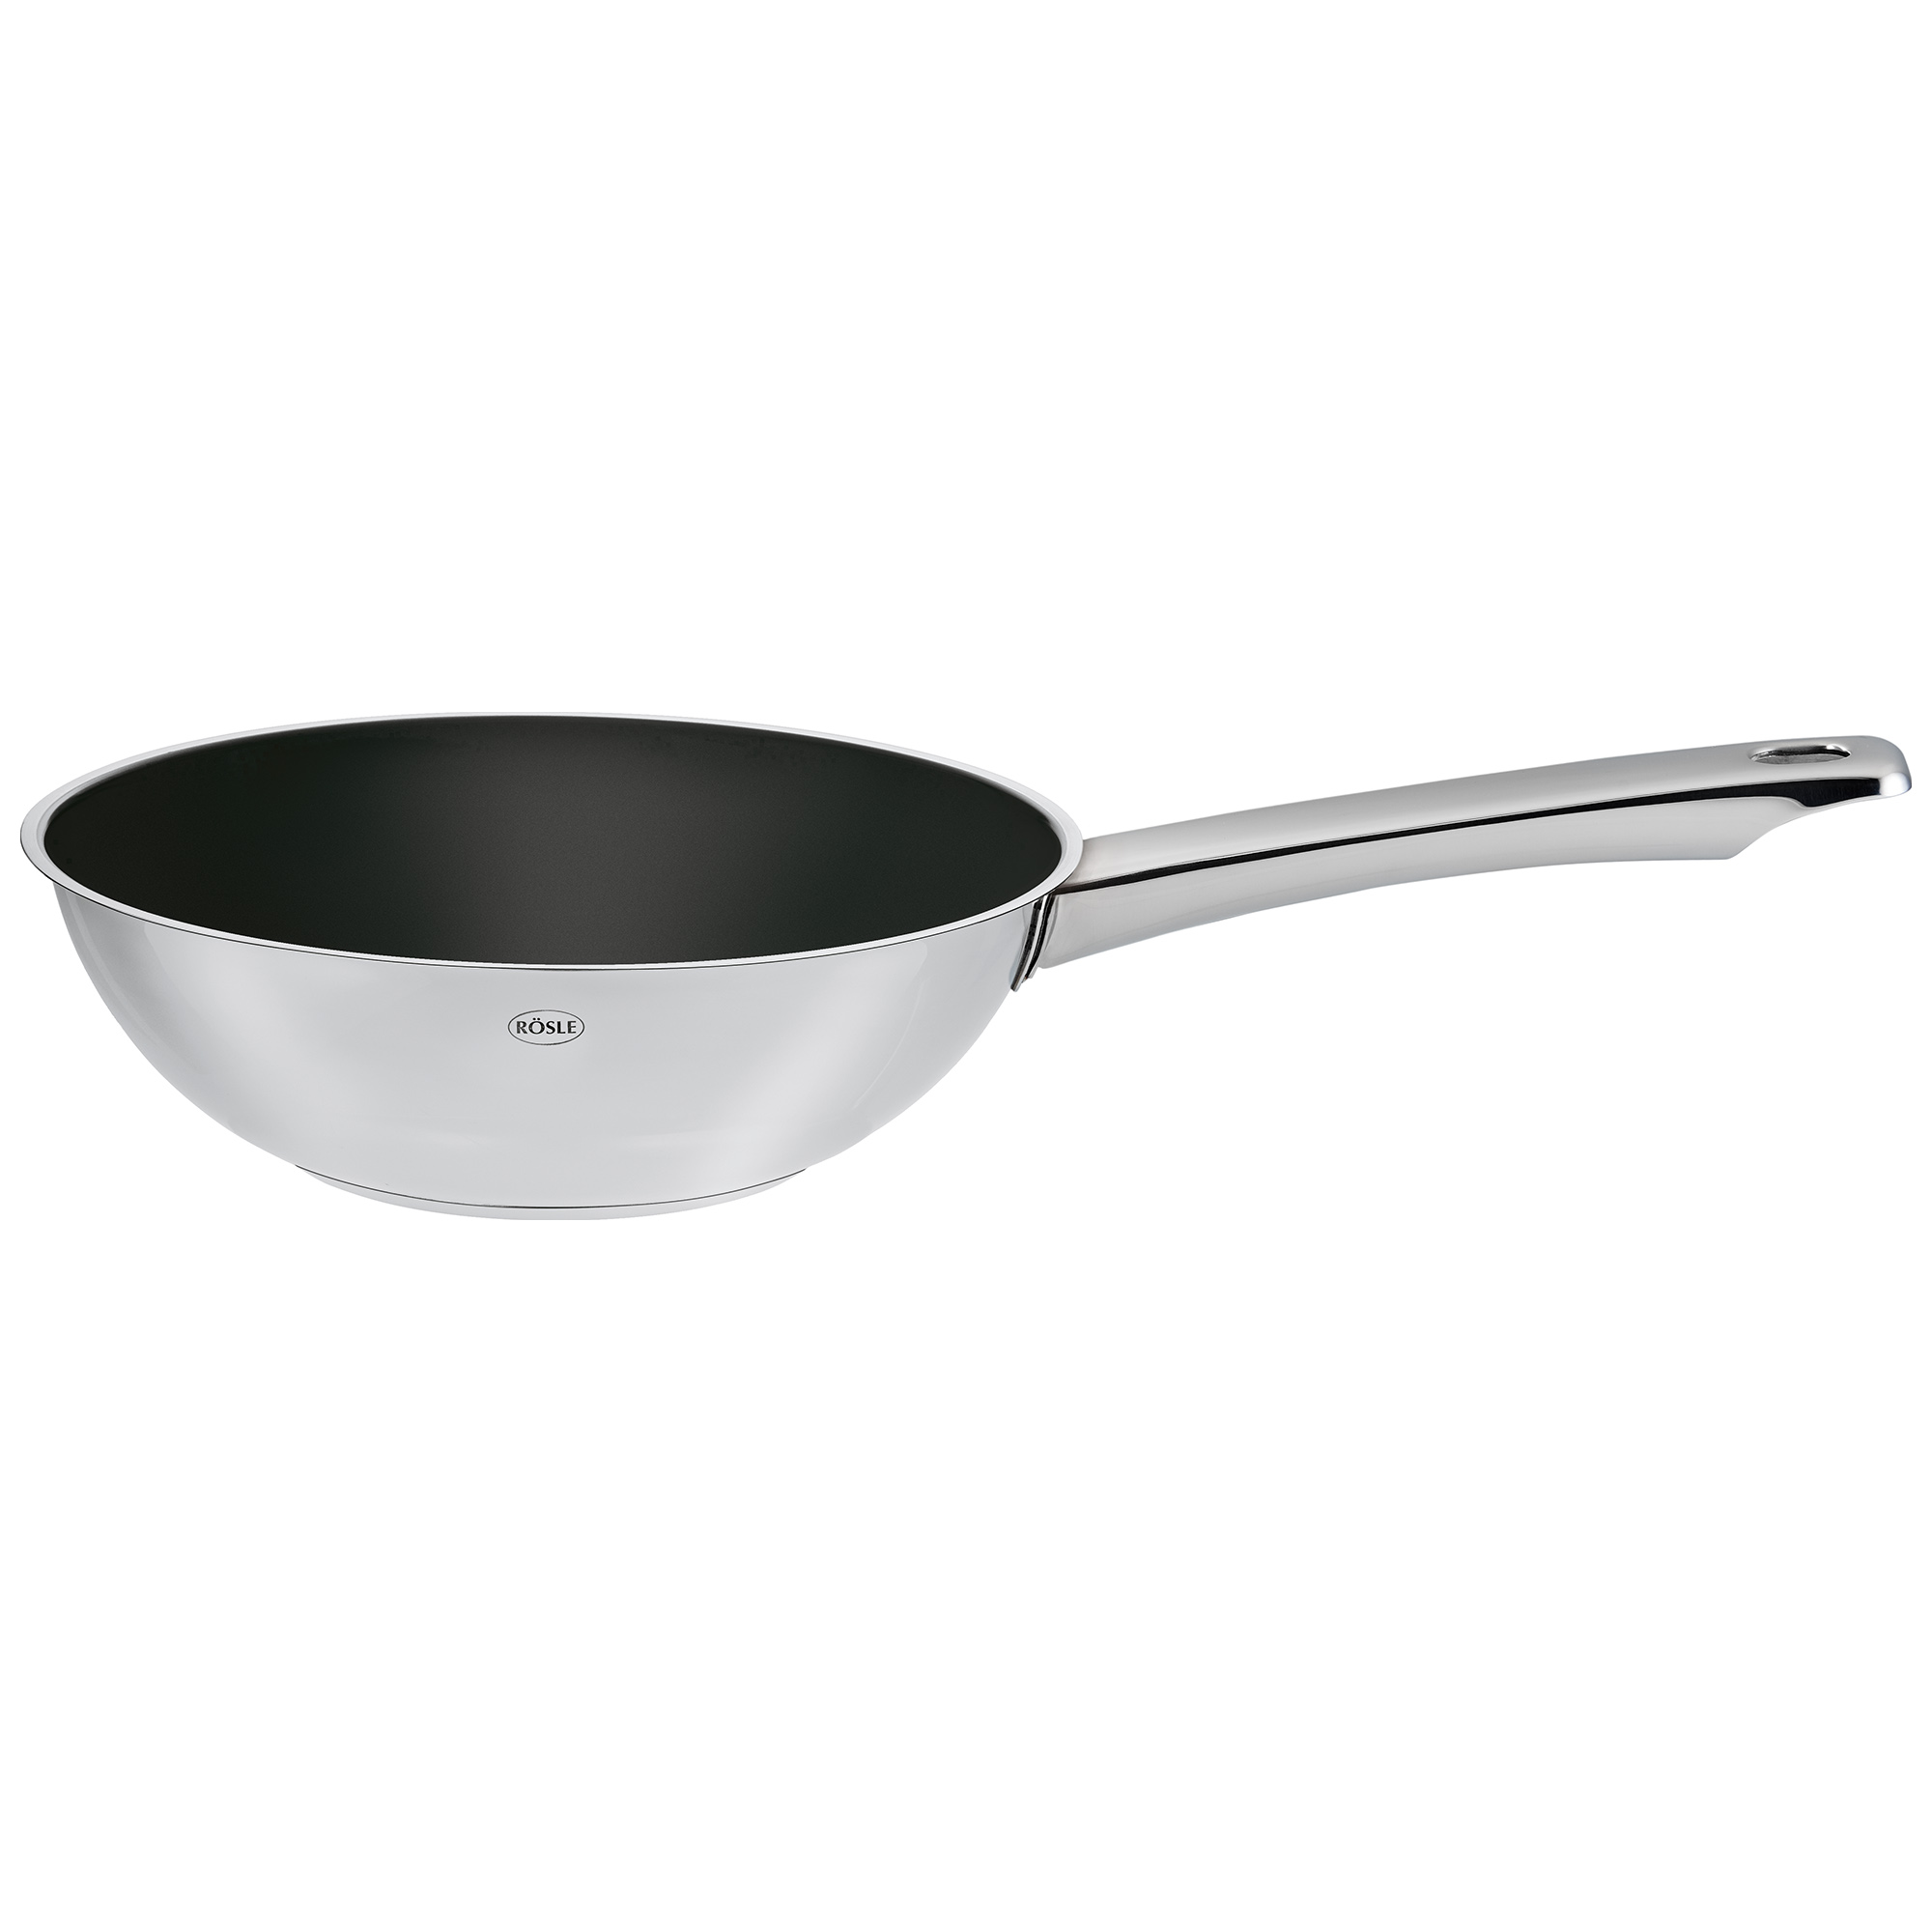 Wokpan Moments Ø 28 cm|11.0 in with non-stick coating